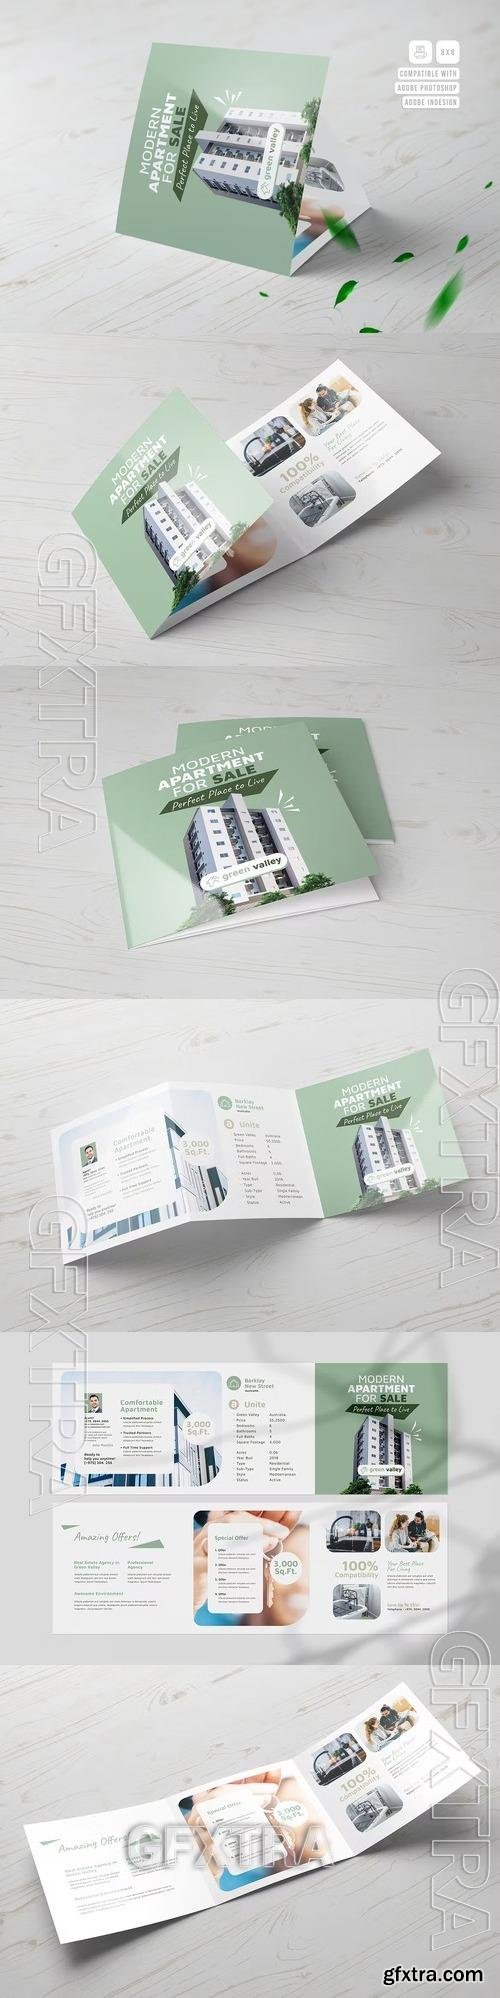 Real Estate Square Trifold Brochure DAMG4D2